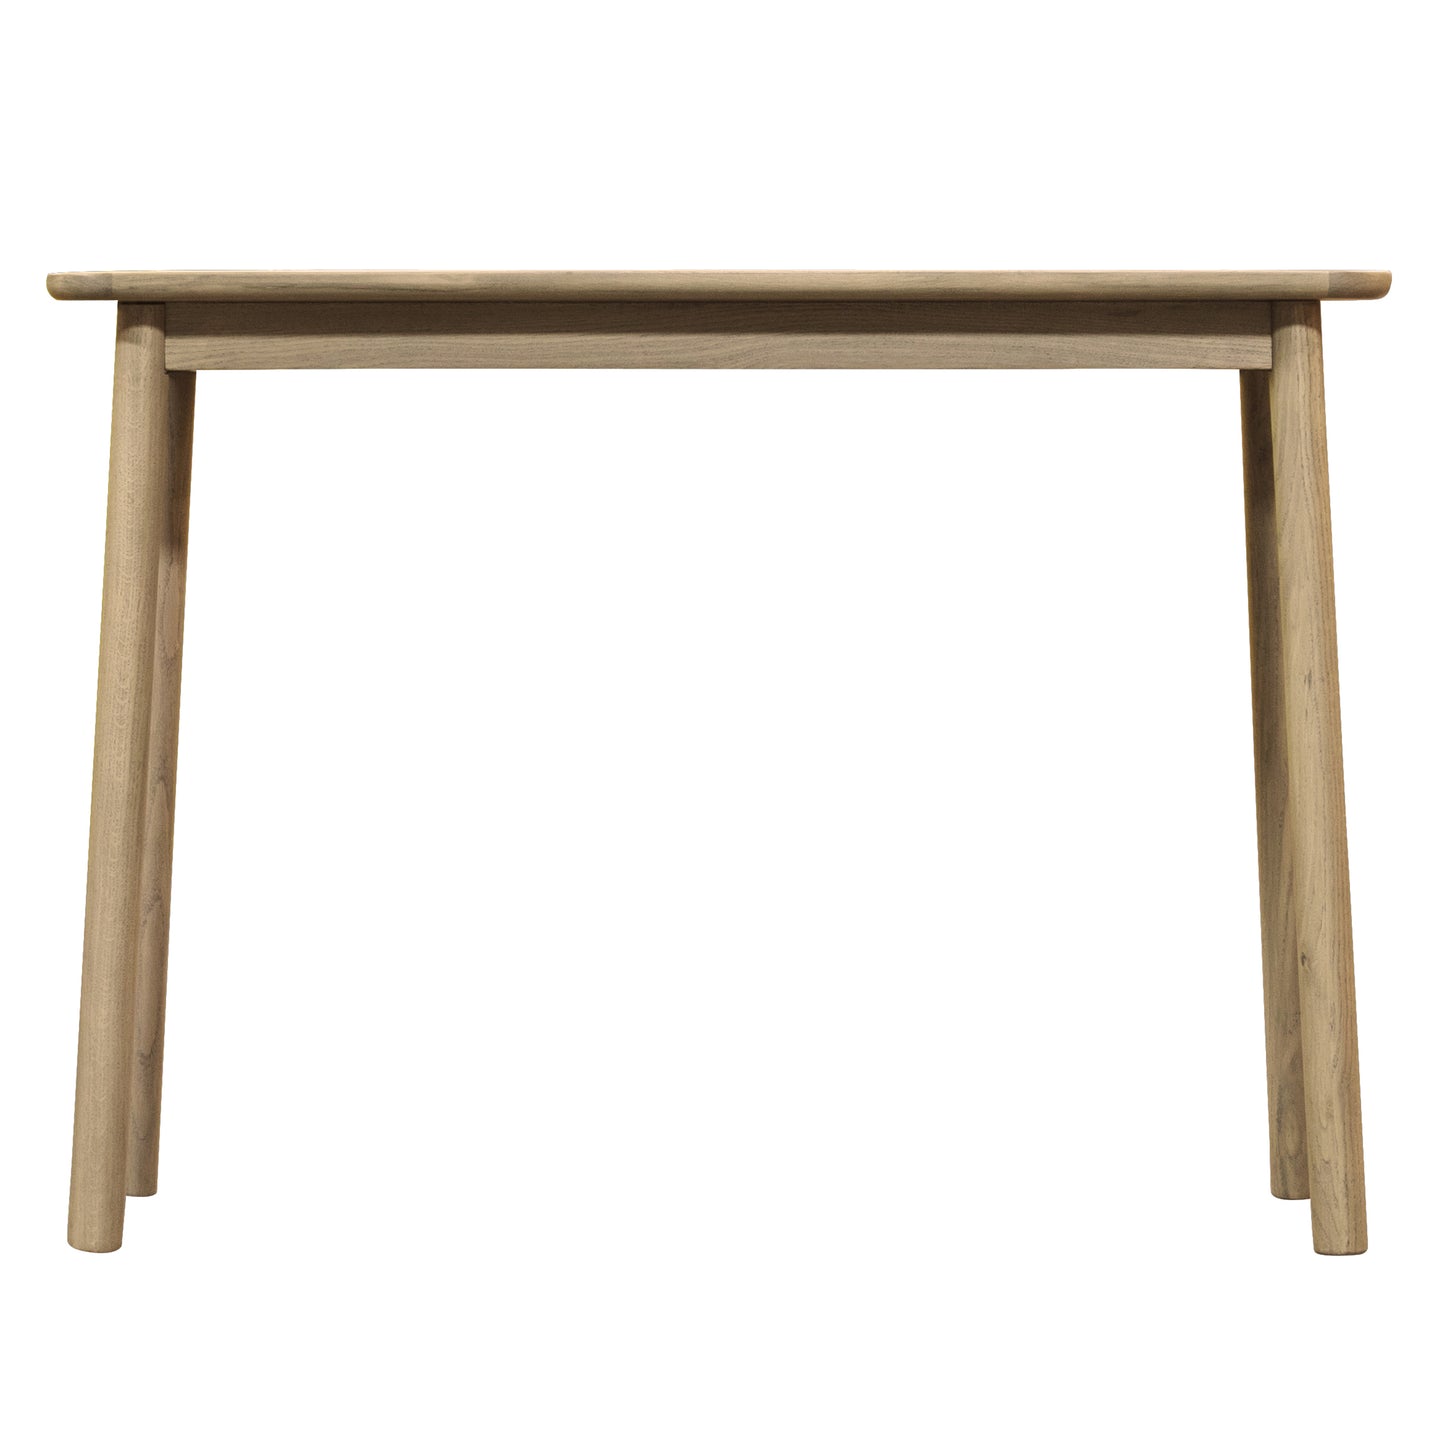 A Wembury Console Table from Kikiathome.co.uk for interior decor.